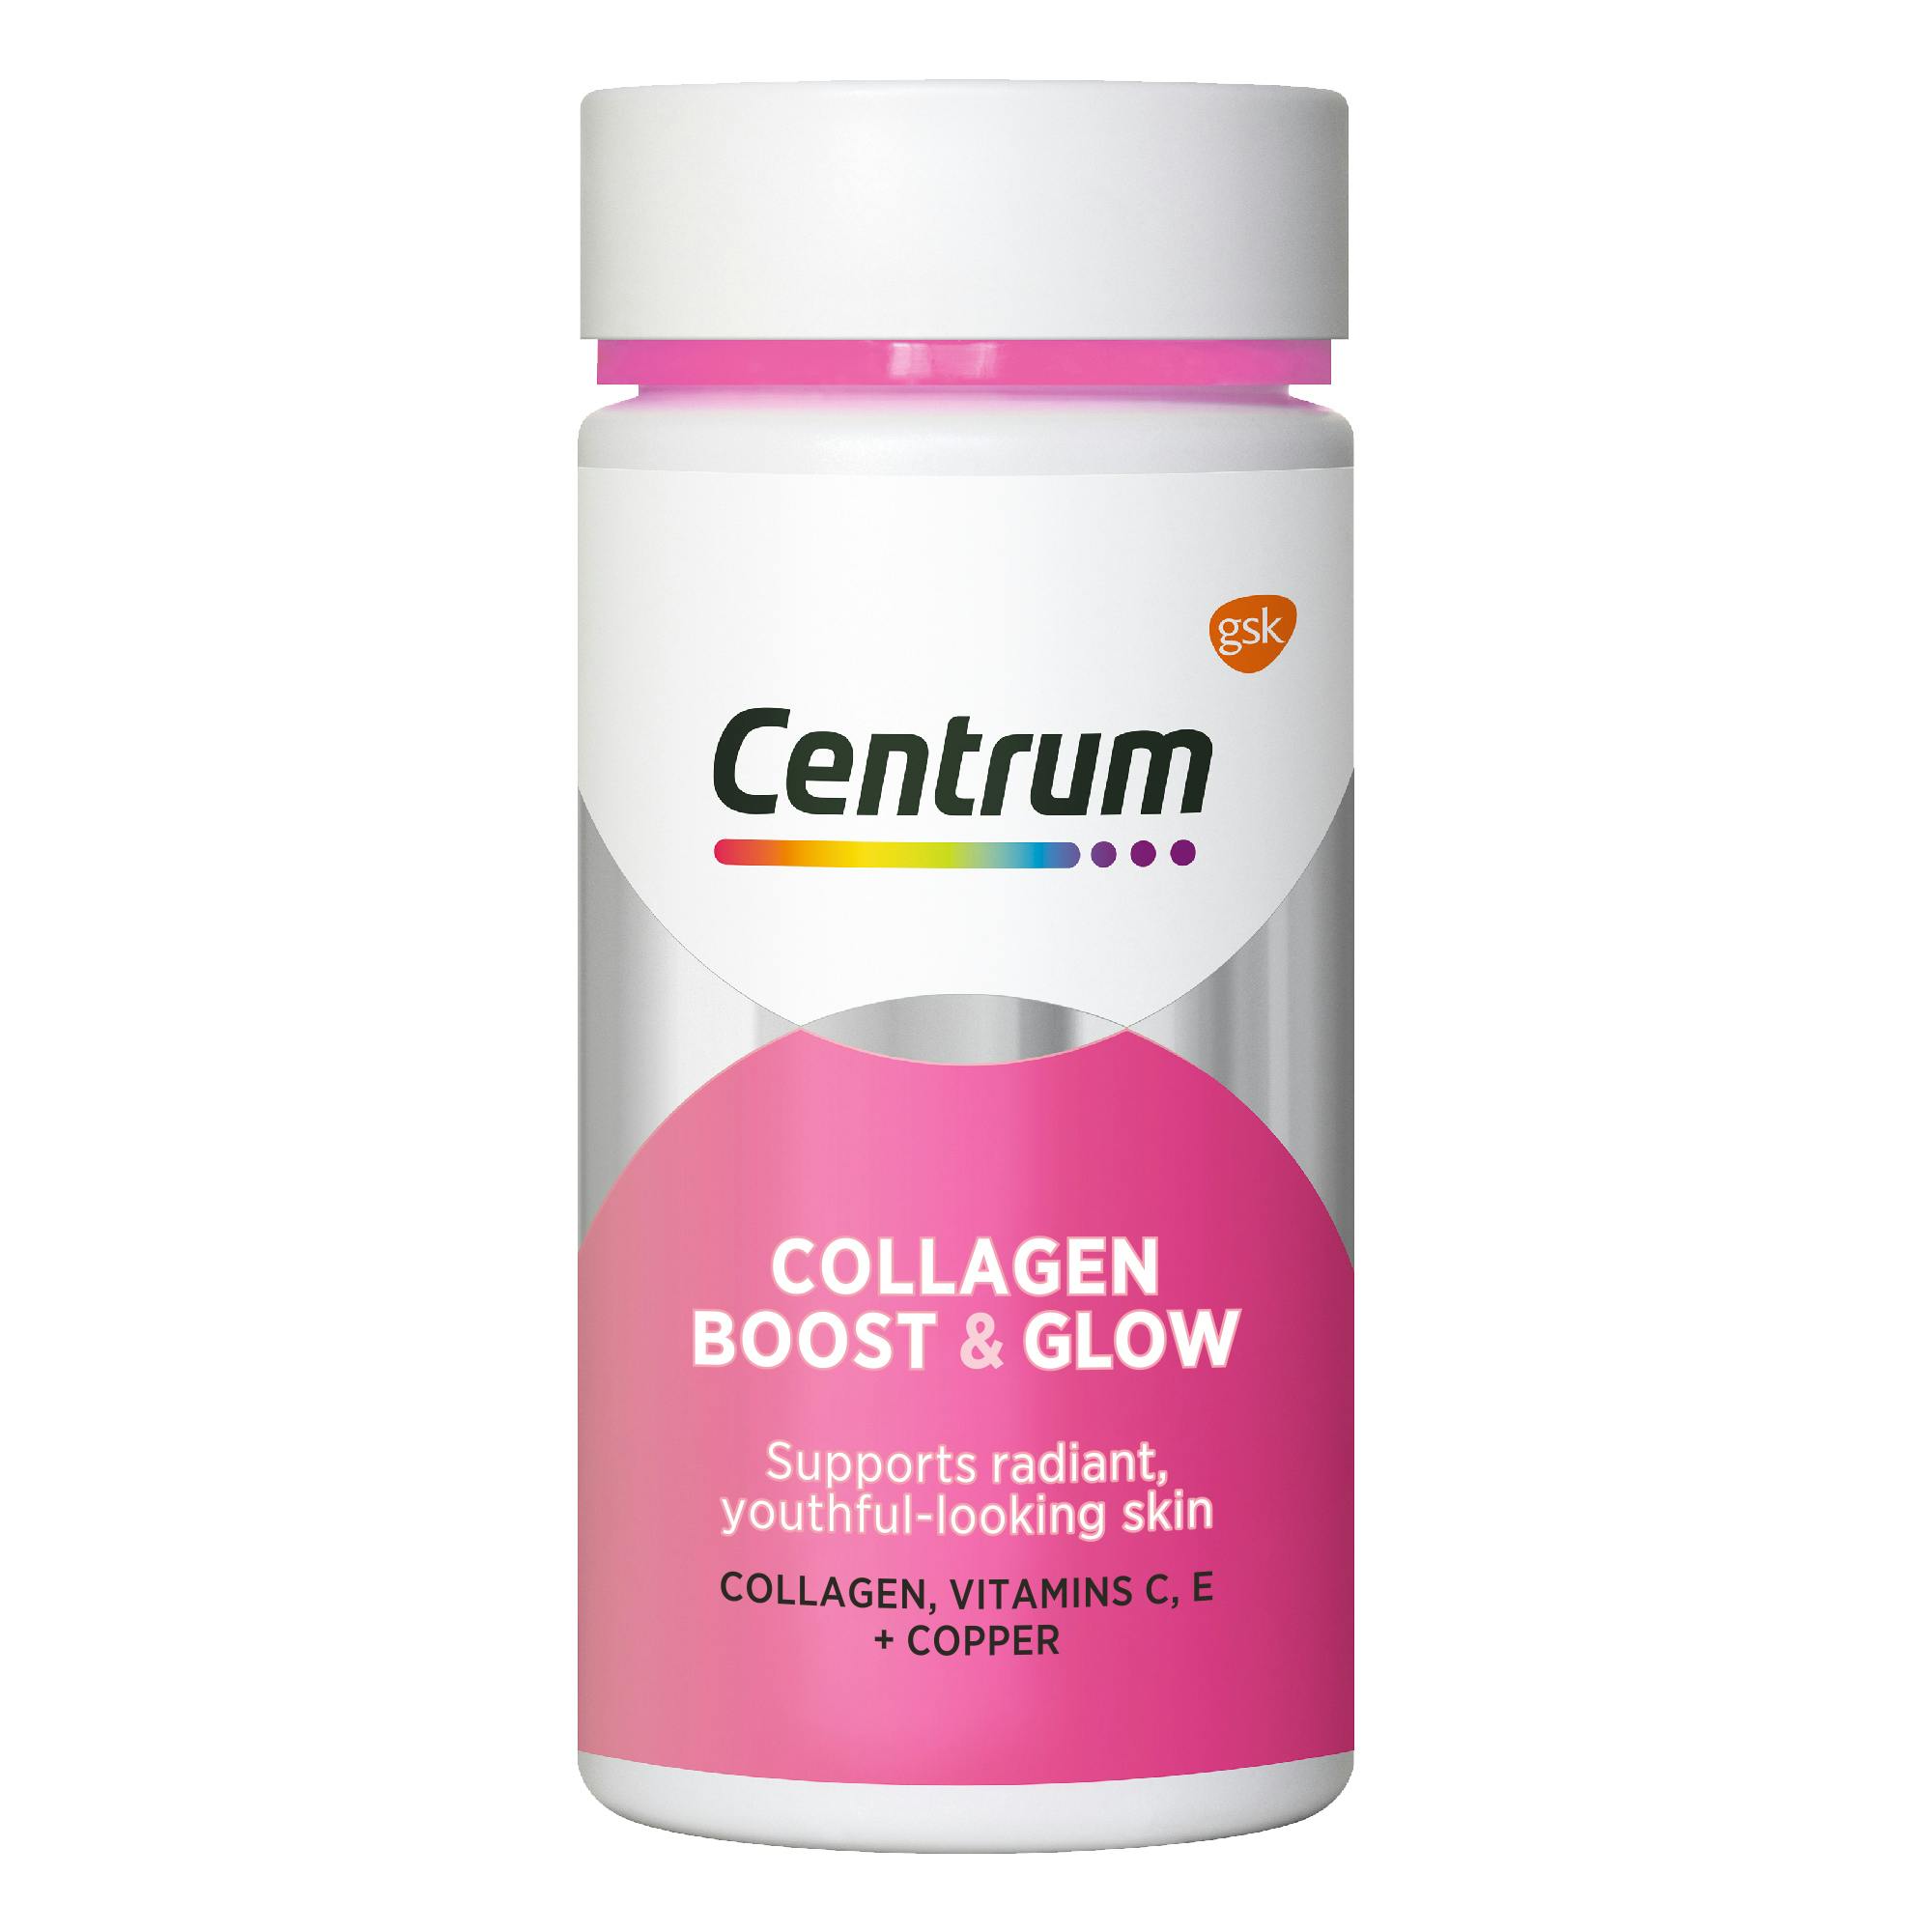 Box of Centrum Adult multivitaminsBottle of Collagen Boost & Glow from the Centrum Benefits Blend (50 tablets).